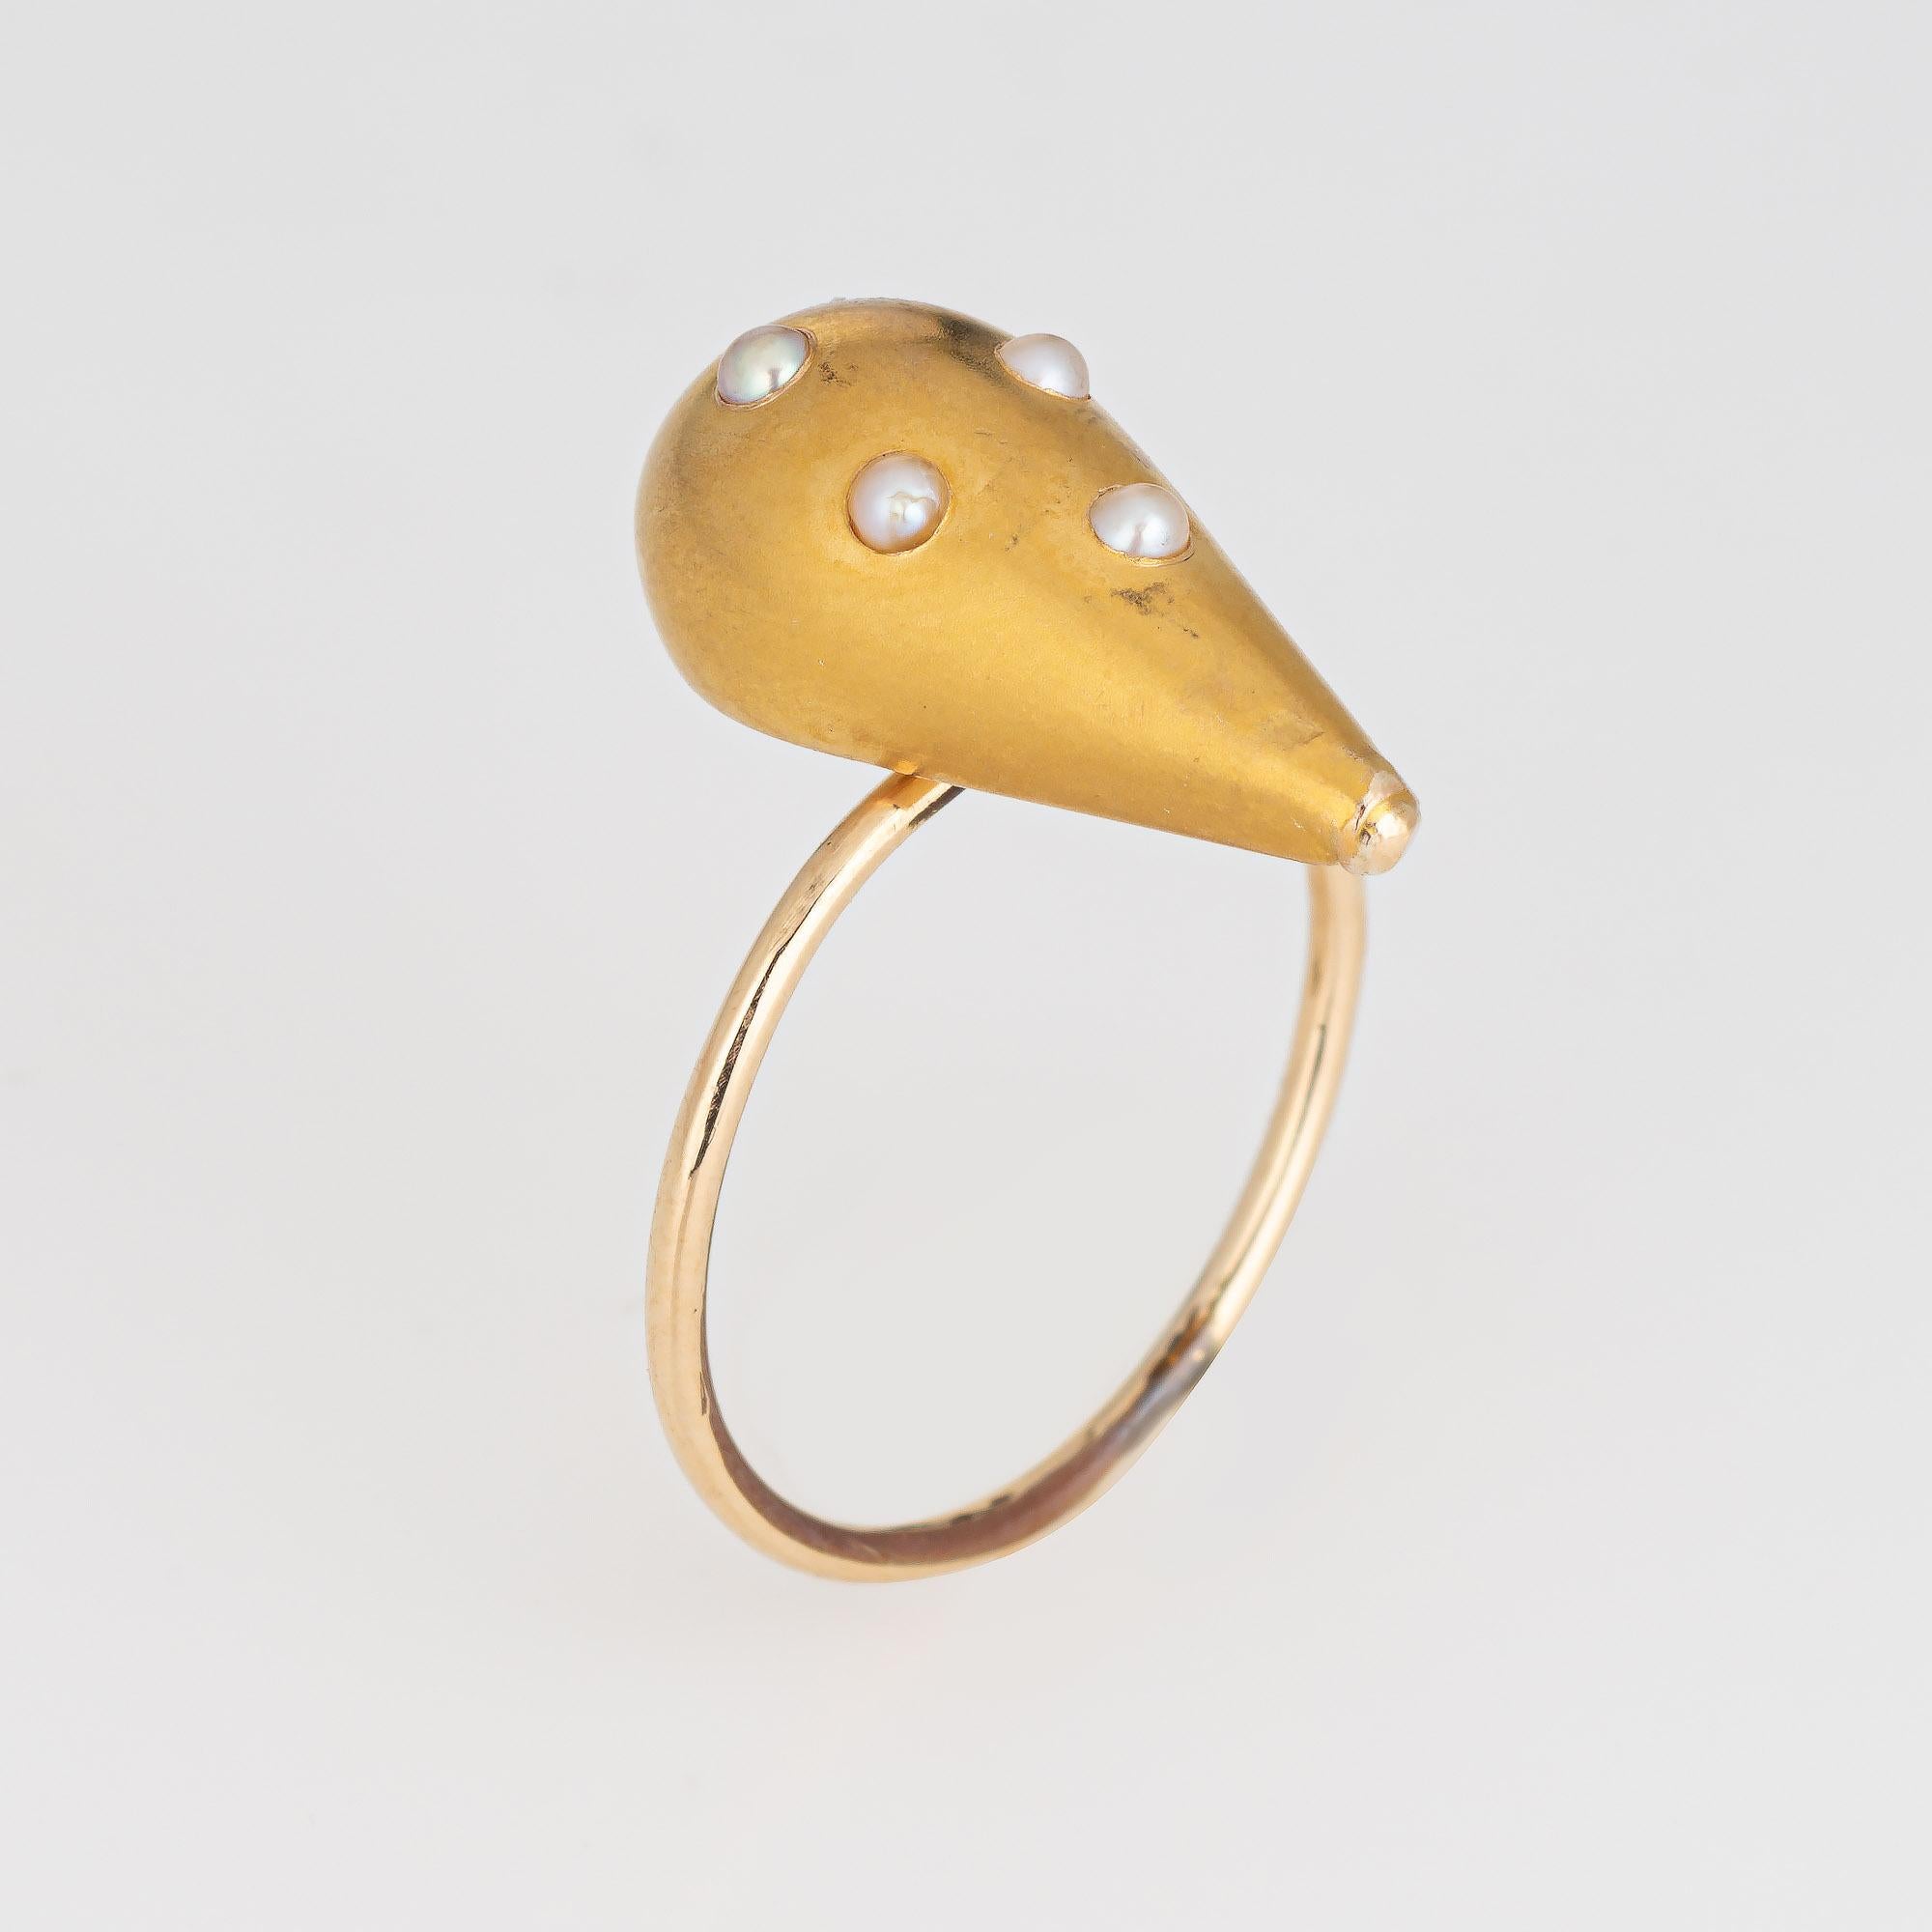 Originally an antique Victorian era stick pin (circa 1880s to 1900s), the seed pearl ring is crafted in 14 karat yellow gold.

The ring is mounted with the original stick pin. Our jeweler rounded the stick pin into a slim band for the finger. The